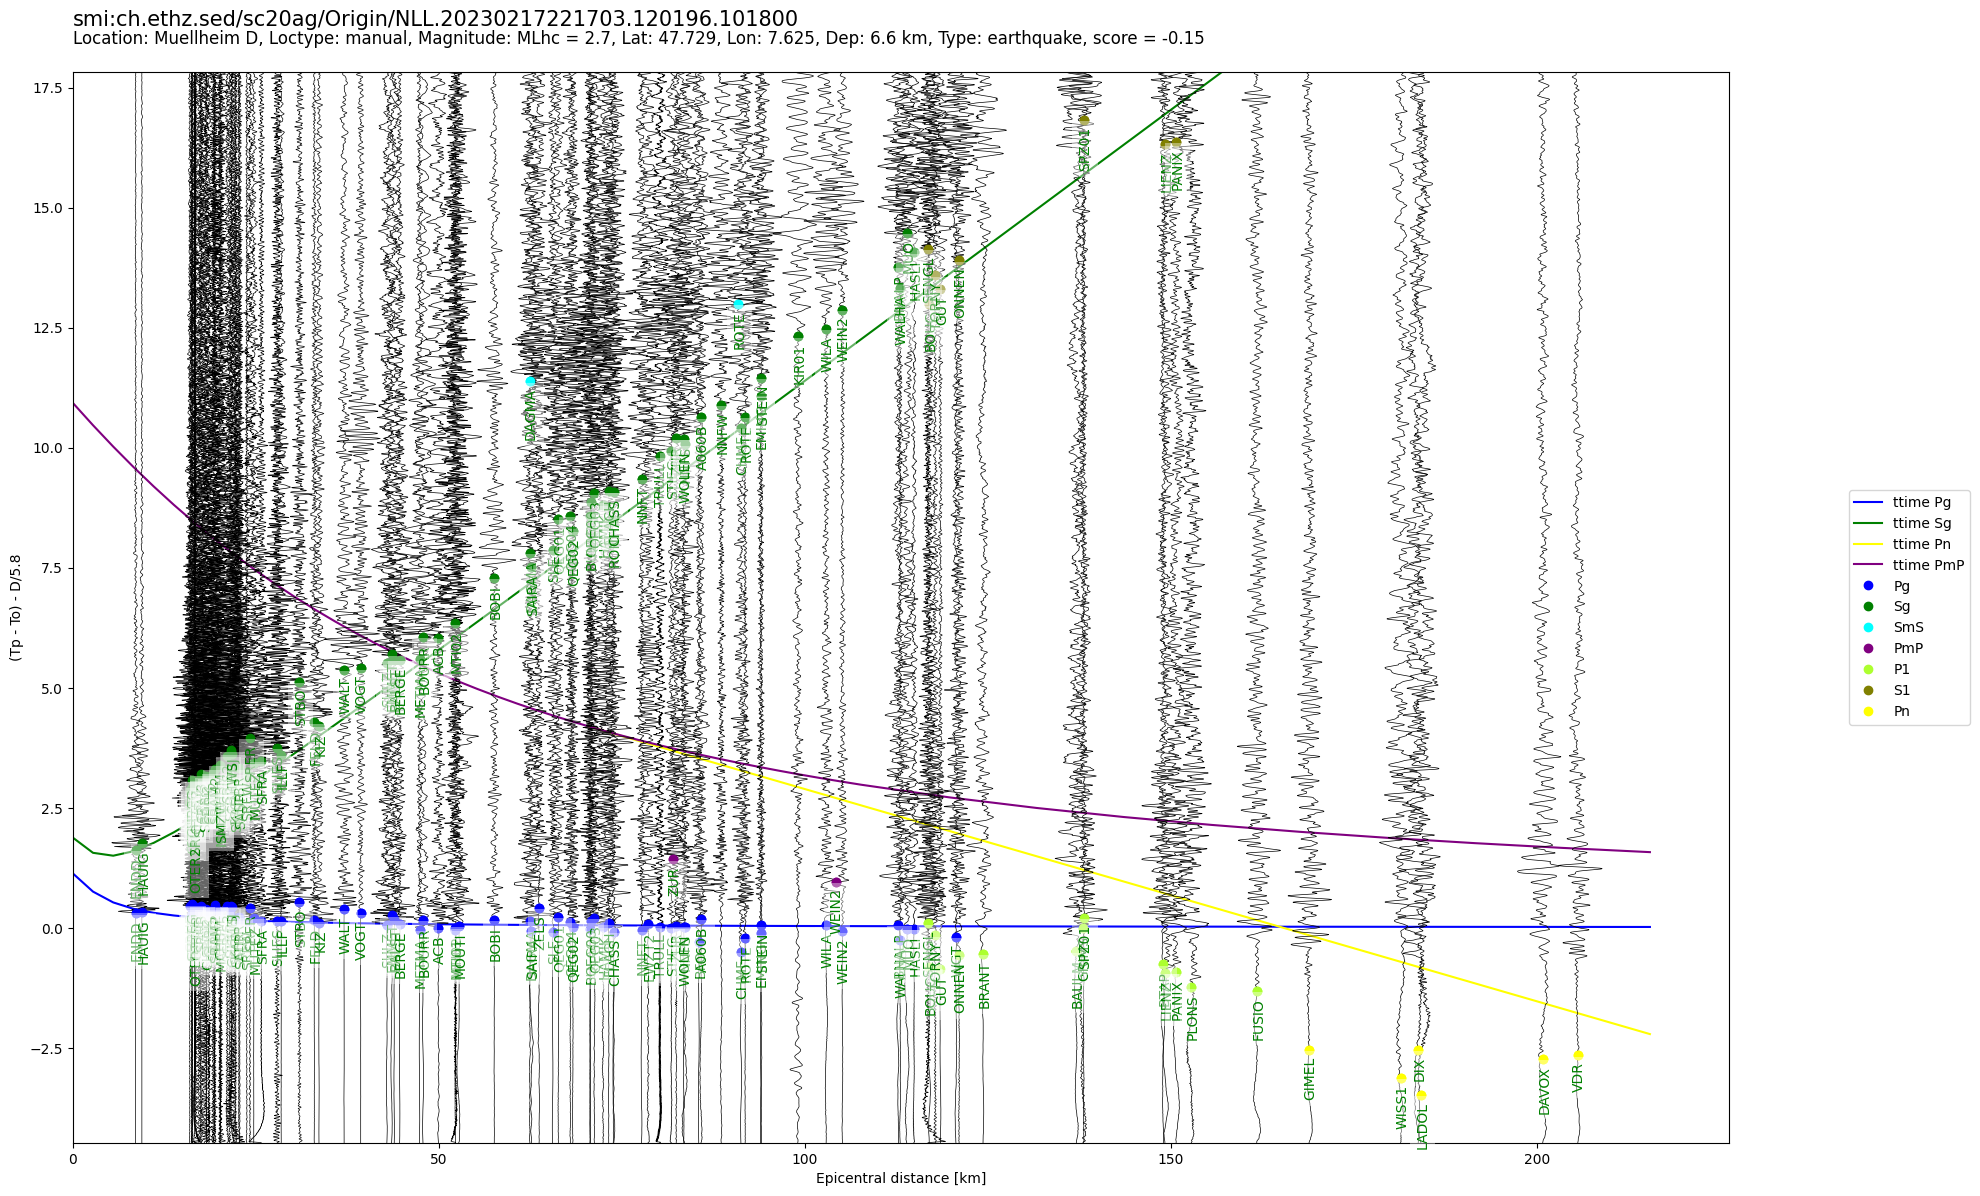 travel time plot. click to enlarge in separate window.